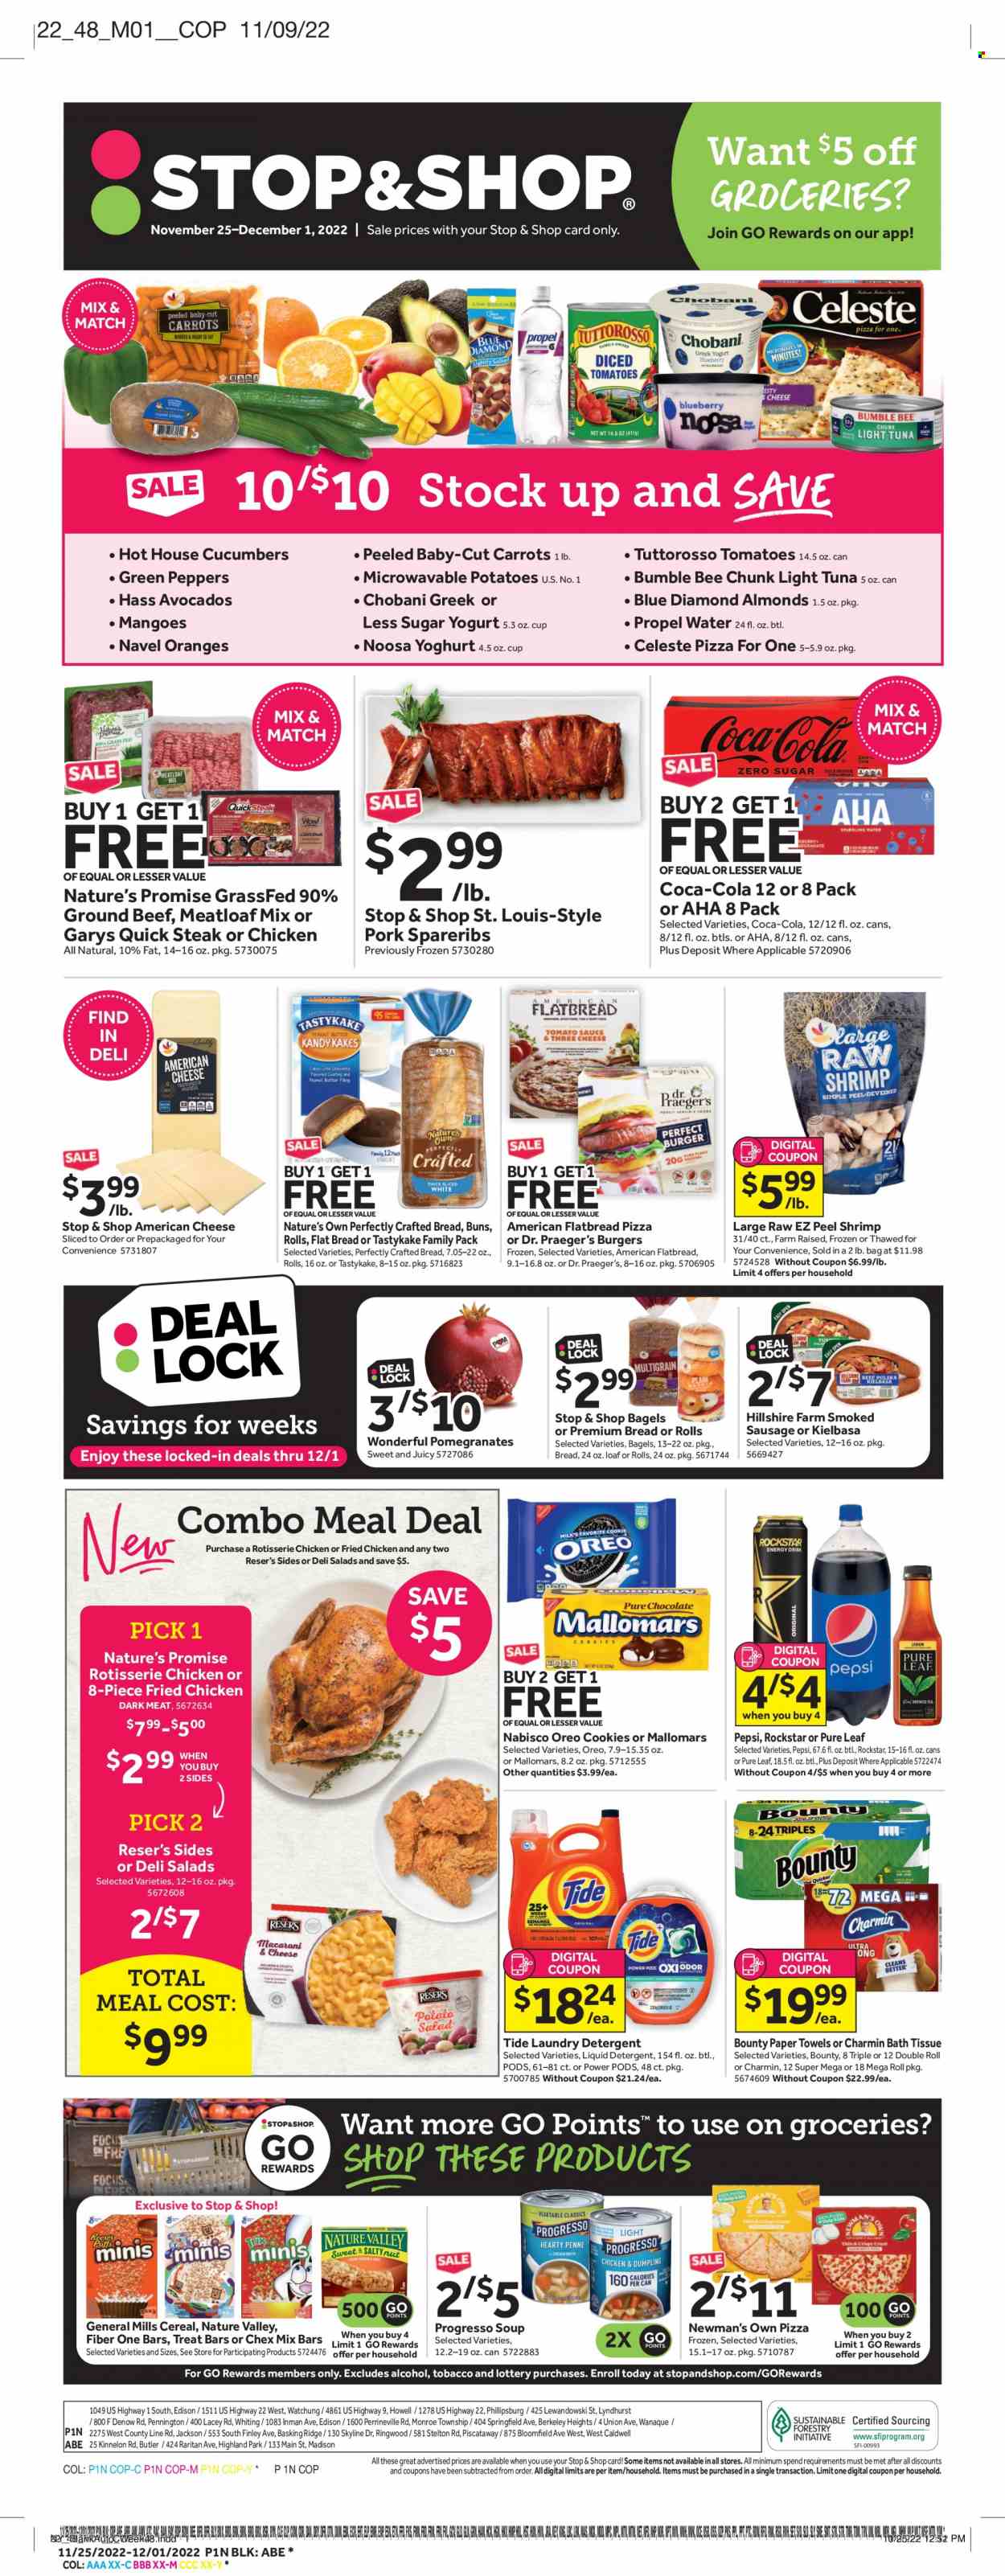 Stop & Shop Flyer - 11/25/2022 - 12/01/2022 - Sales products - bagels, buns, Nature’s Promise, flatbread, carrots, cucumbers, potatoes, salad, peppers, avocado, mango, orange, beef meat, ground beef, steak, meatloaf, pork spare ribs, tuna, shrimps, whiting, pizza, chicken roast, Bumble Bee, fried chicken, Progresso, Hillshire Farm, sausage, smoked sausage, kielbasa, potato salad, american cheese, Oreo, yoghurt, Chobani, milk, Celeste, cookies, chocolate, Bounty, Chex Mix, tomato sauce, light tuna, diced tomatoes, cereals, Nature Valley, Fiber One, penne, almonds, Blue Diamond, Coca-Cola, Pepsi, Rockstar, Pure Leaf, bath tissue, kitchen towels, paper towels, Charmin, detergent, Tide, liquid detergent, laundry detergent, pin, table, Caldwell, Nature's Own, pomegranate, navel oranges. Page 1.